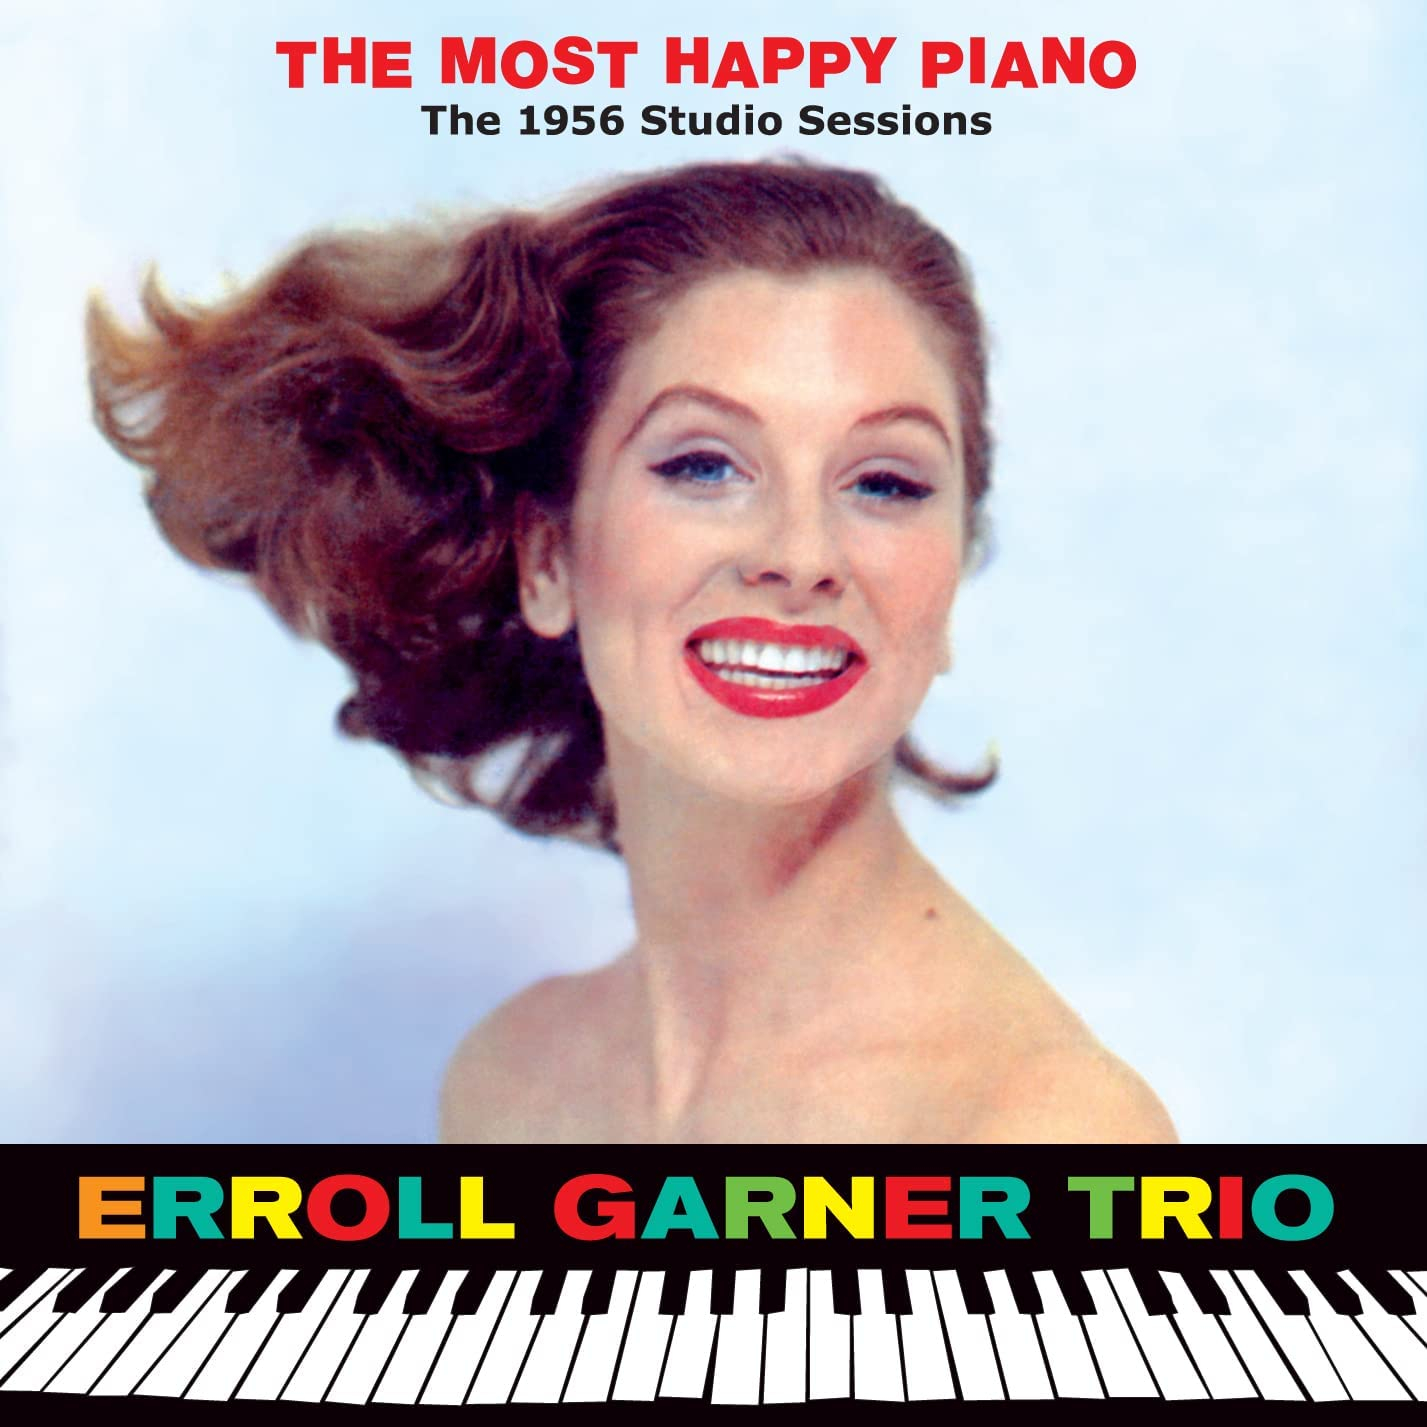 THE MOST HAPPY PIANO - THE 1956 STUDIO SESSIONS (2-CD SET)